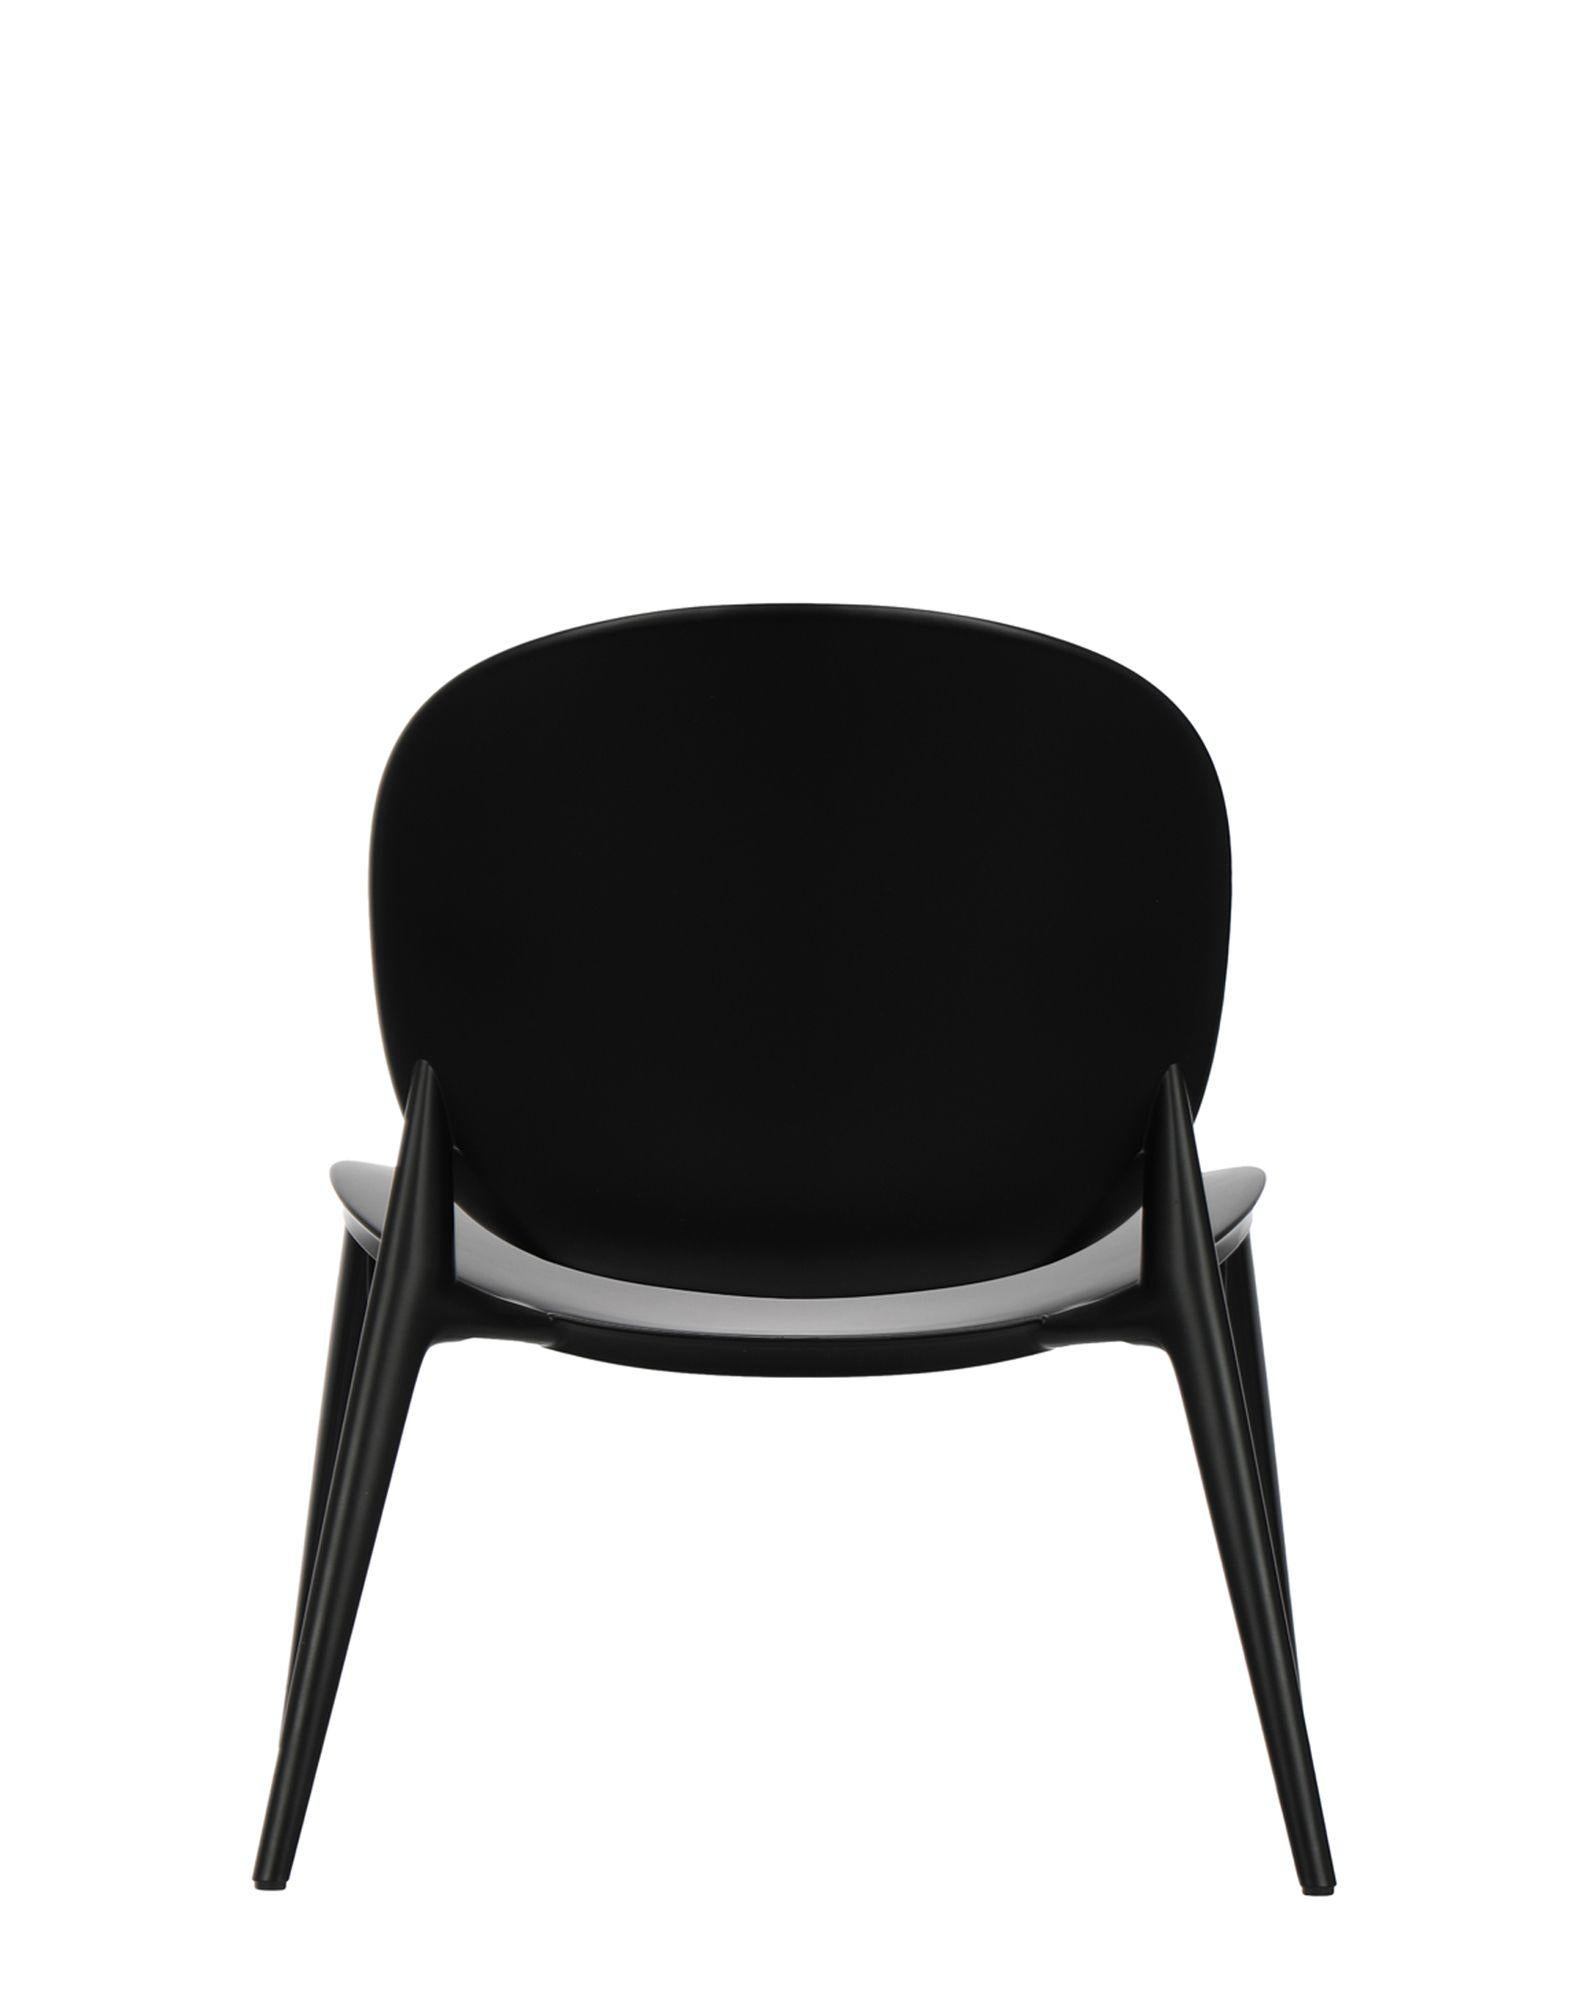 Kartell Be Bop in Black by Ludovica + Roberta Palomba In New Condition For Sale In Brooklyn, NY